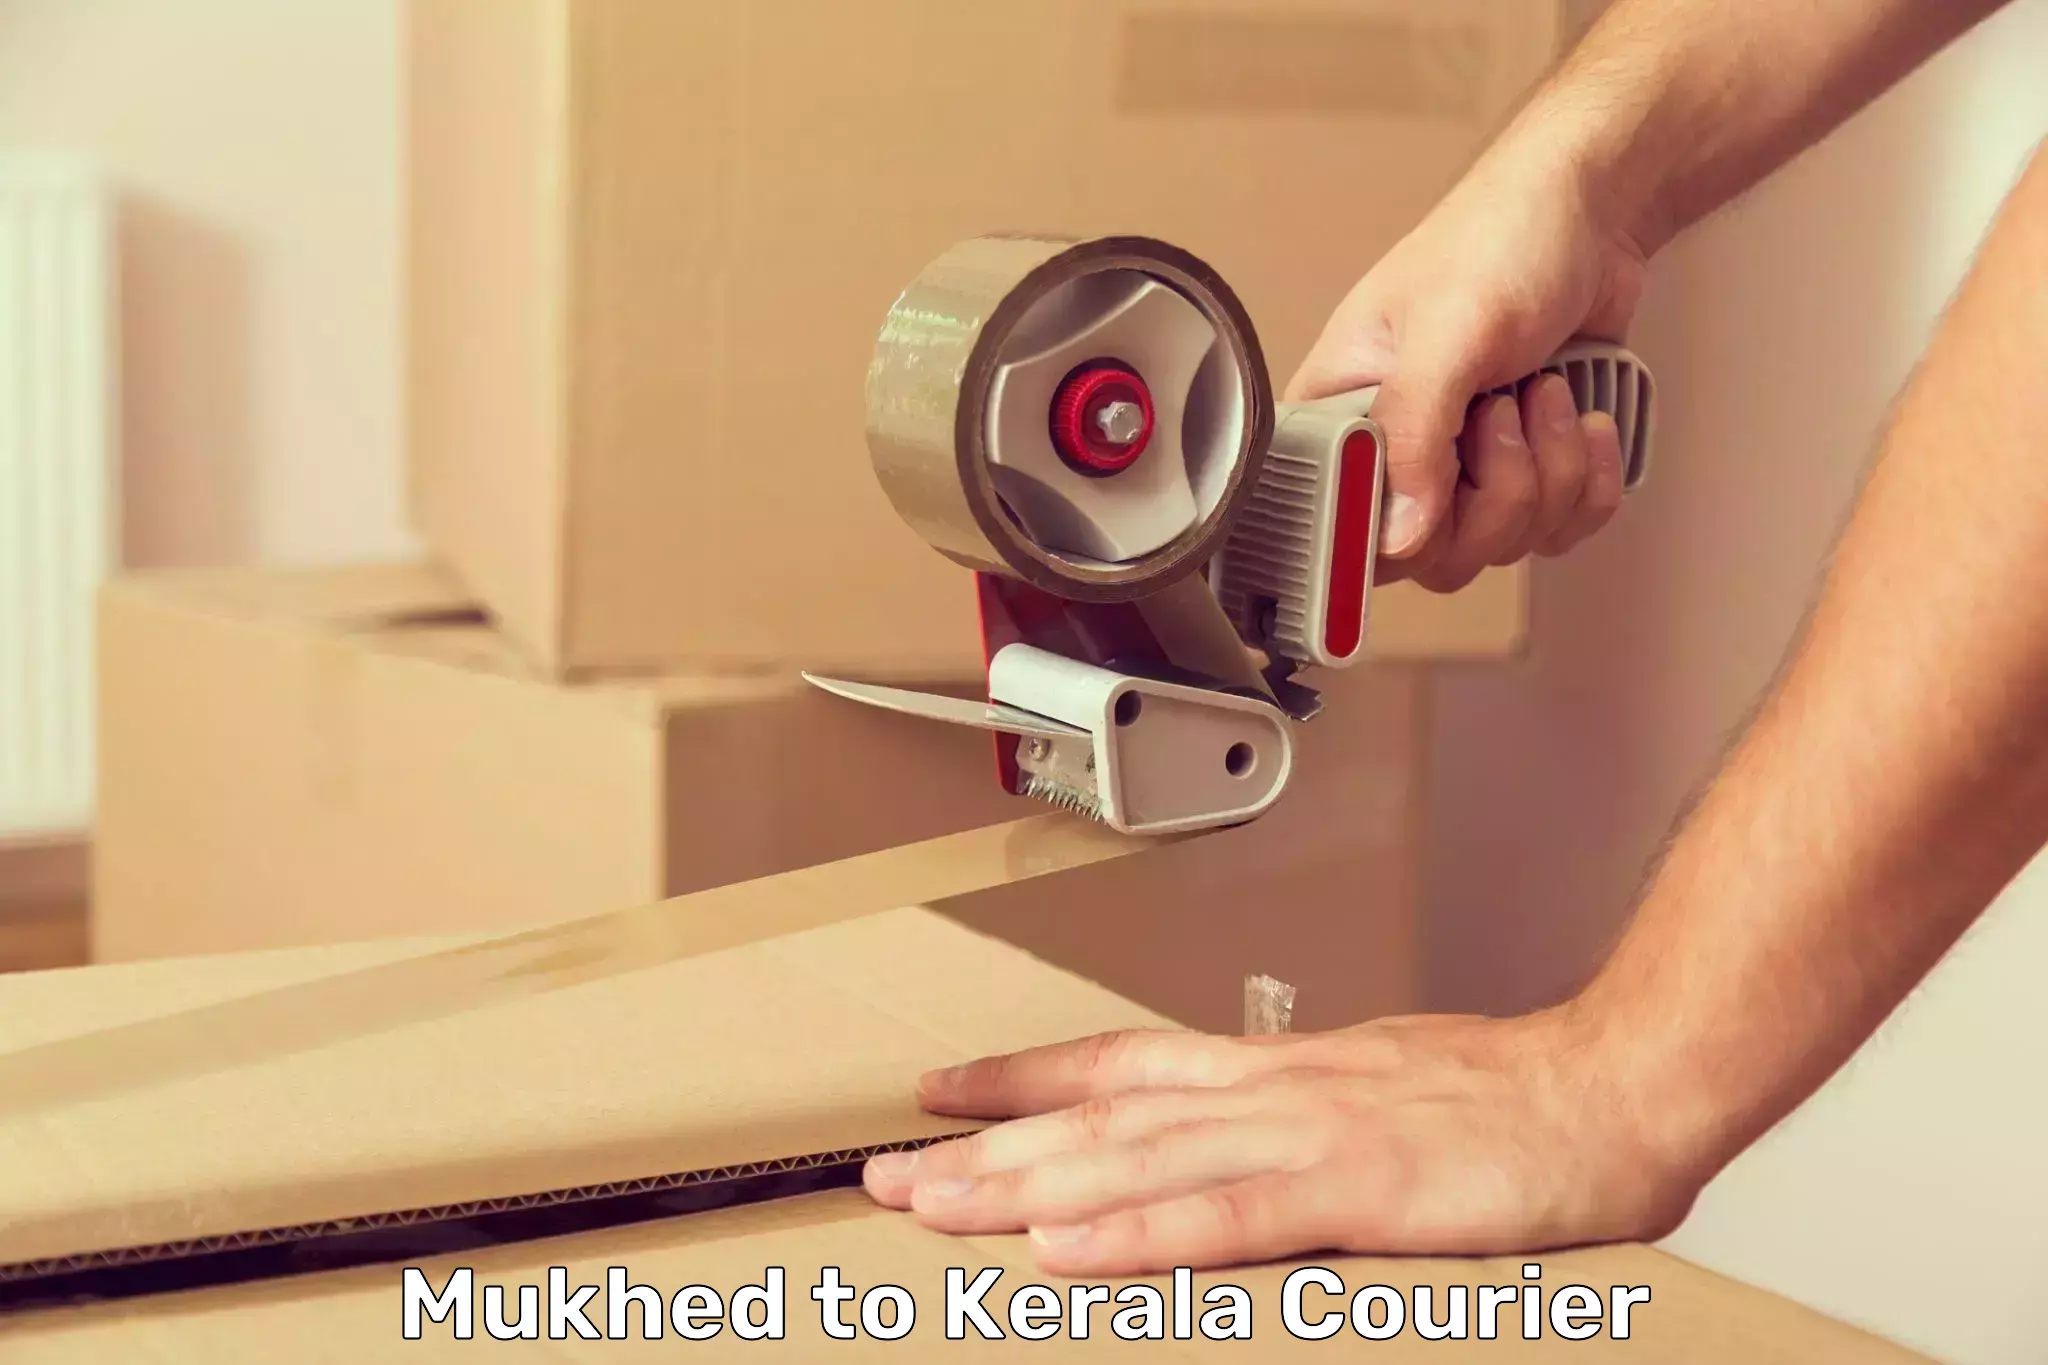 Quick booking process in Mukhed to Kerala